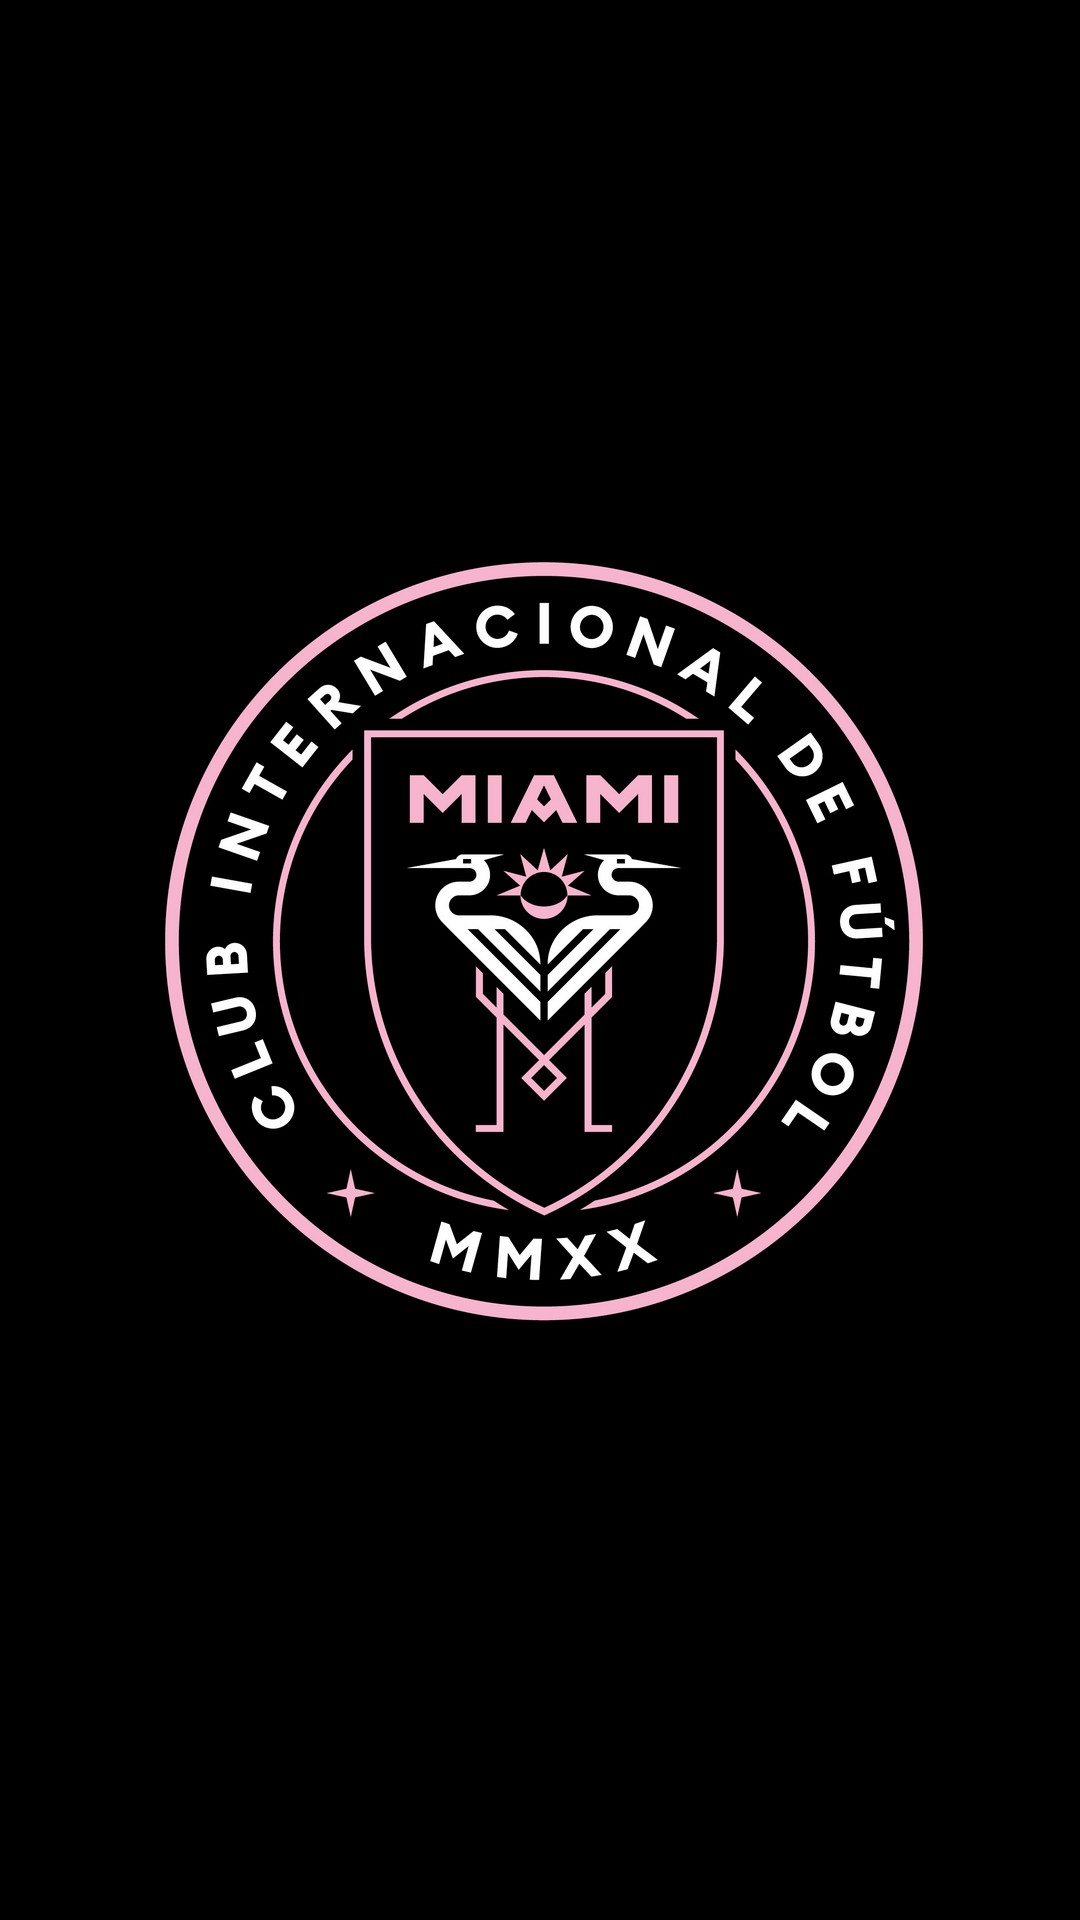 Wallpaper Inter Miami Mobile with high-resolution 1080x1920 pixel. You can use this wallpaper for your Desktop Computers, Mac Screensavers, Windows Backgrounds, iPhone Wallpapers, Tablet or Android Lock screen and another Mobile device